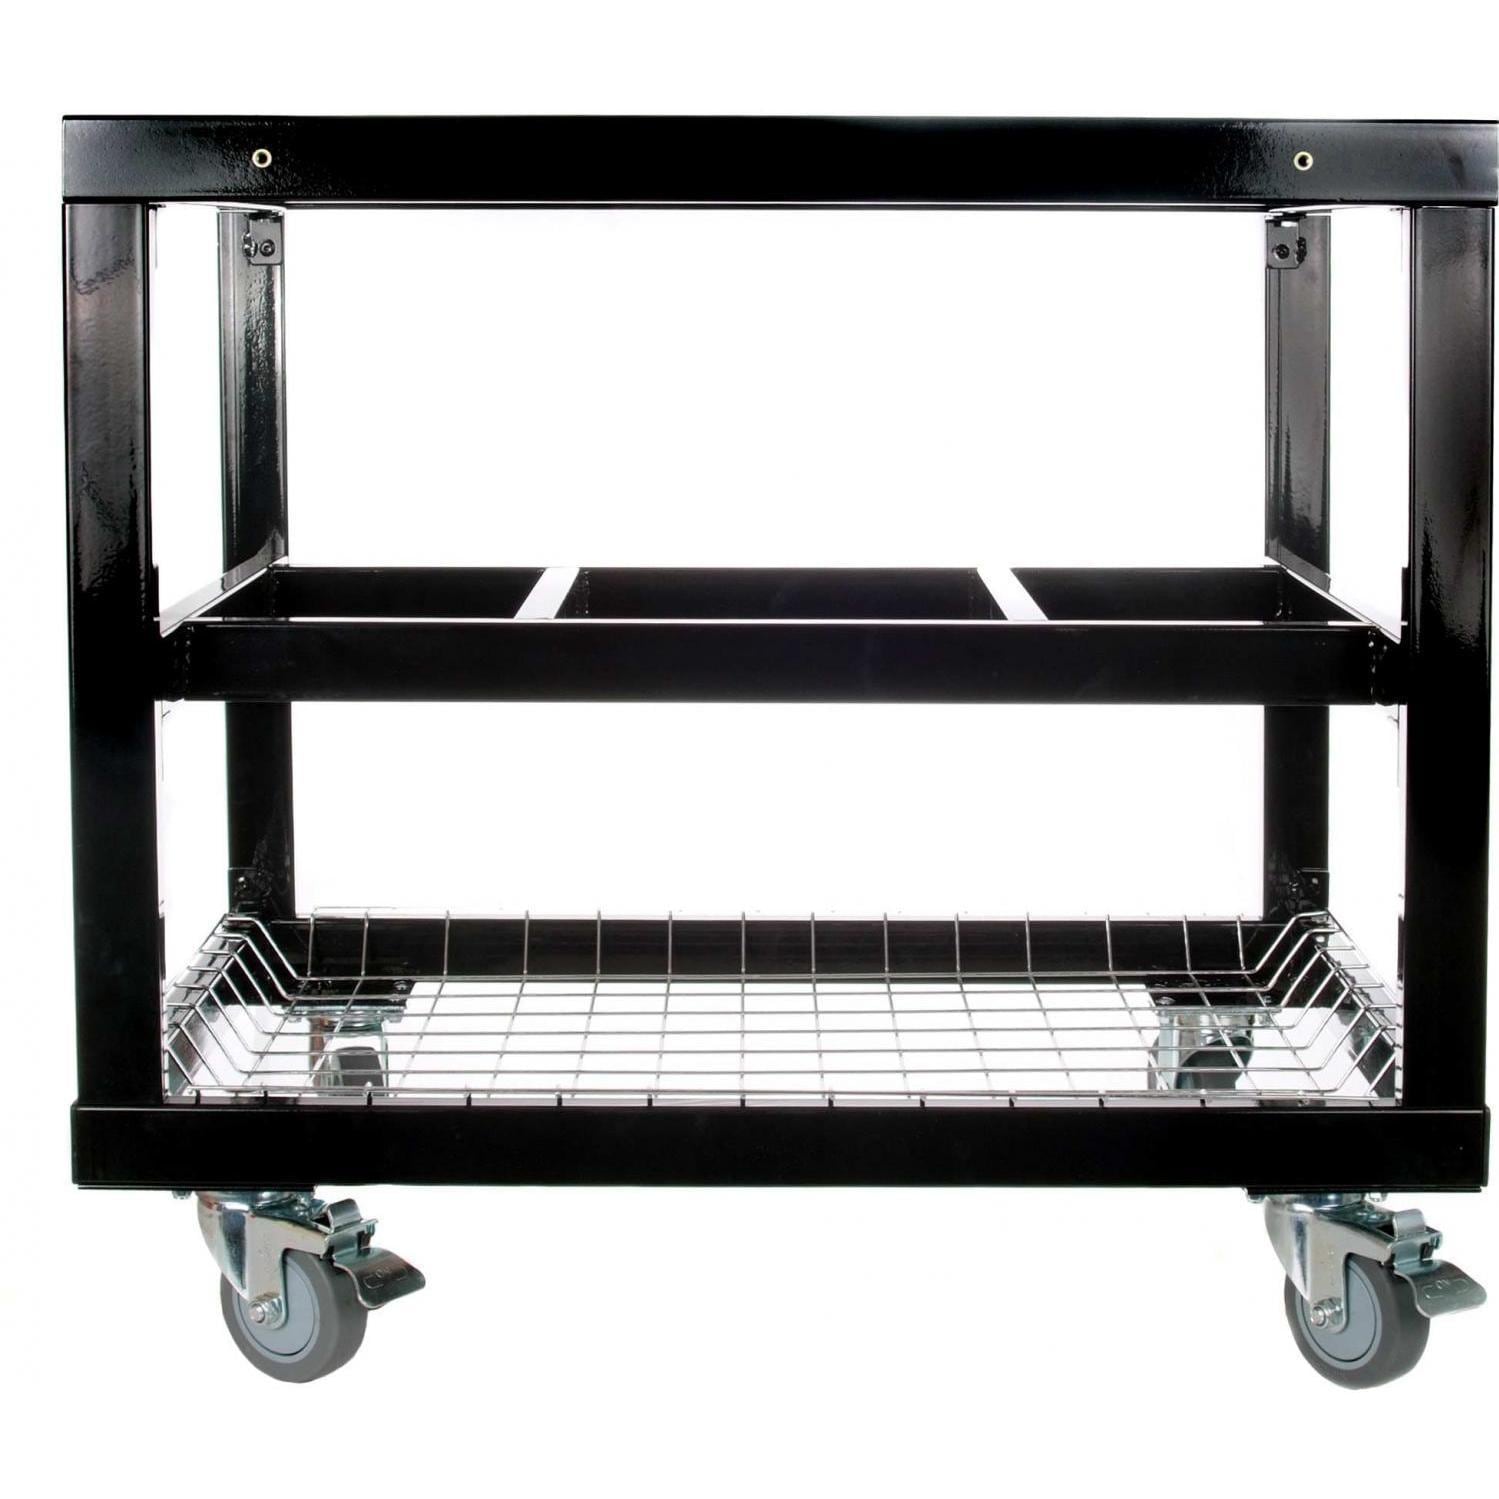 Primo Grills 368 Cart with Basket for Extra Large 400 & Oval Large 300 Grills - image 1 of 5